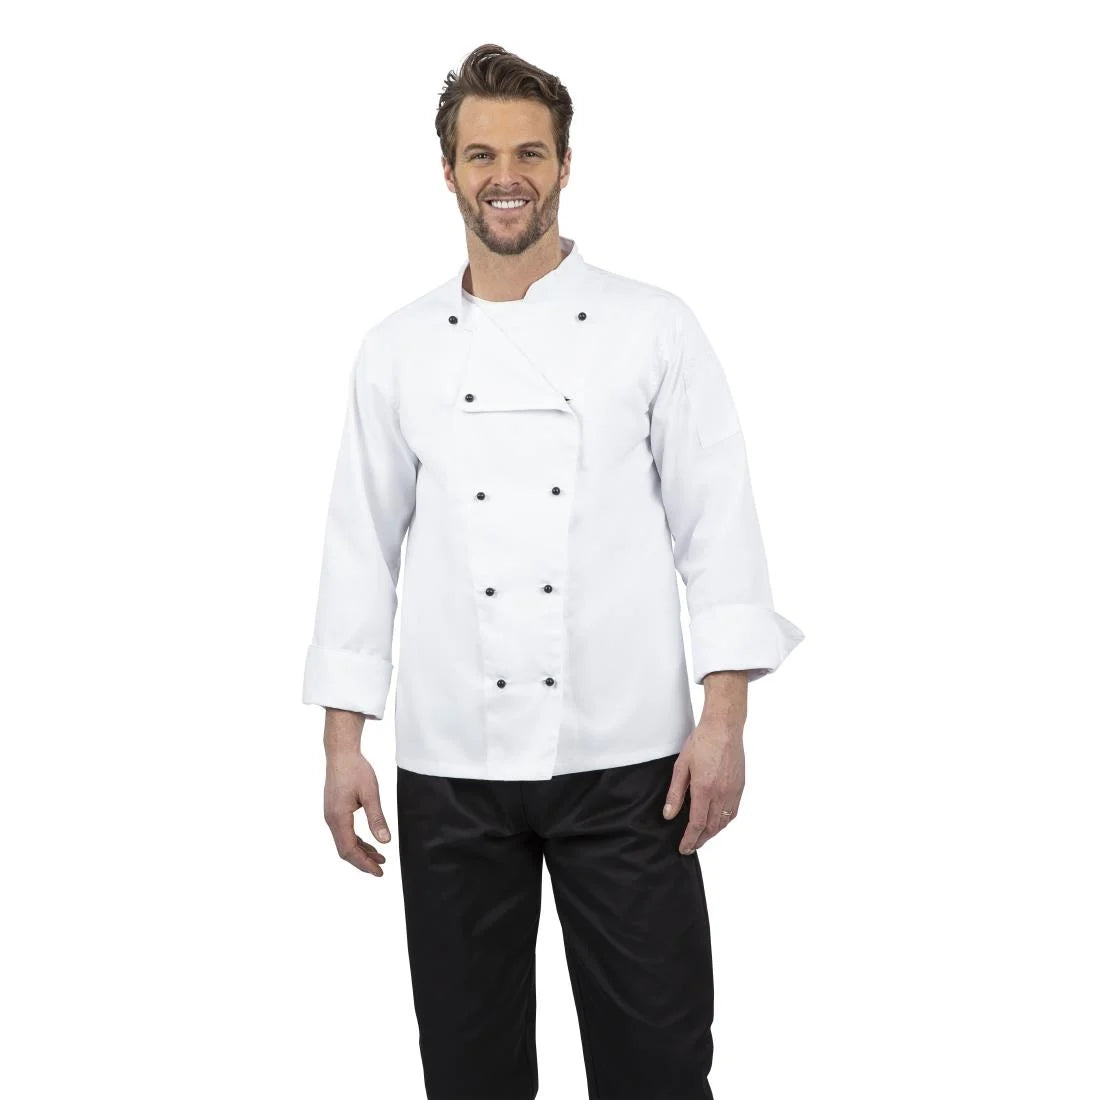 DL710-L Whites Chicago Unisex Chefs Jacket Long Sleeve L JD Catering Equipment Solutions Ltd